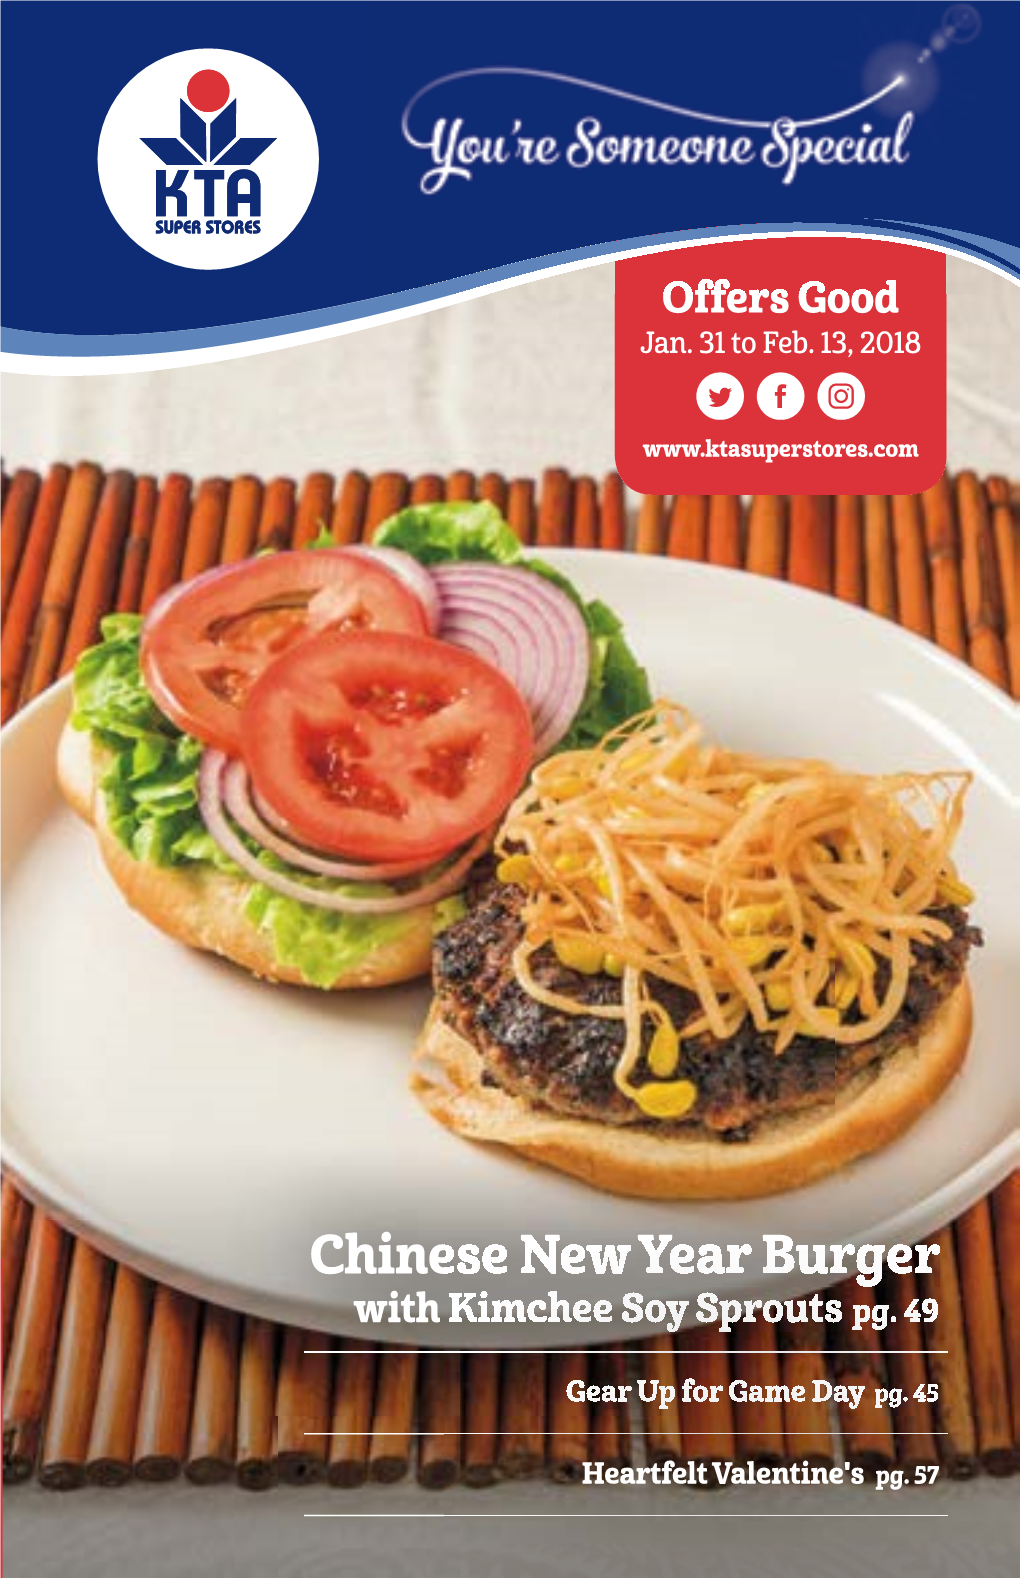 Chinese New Year Burger with Kimchee Soy Sprouts Pg